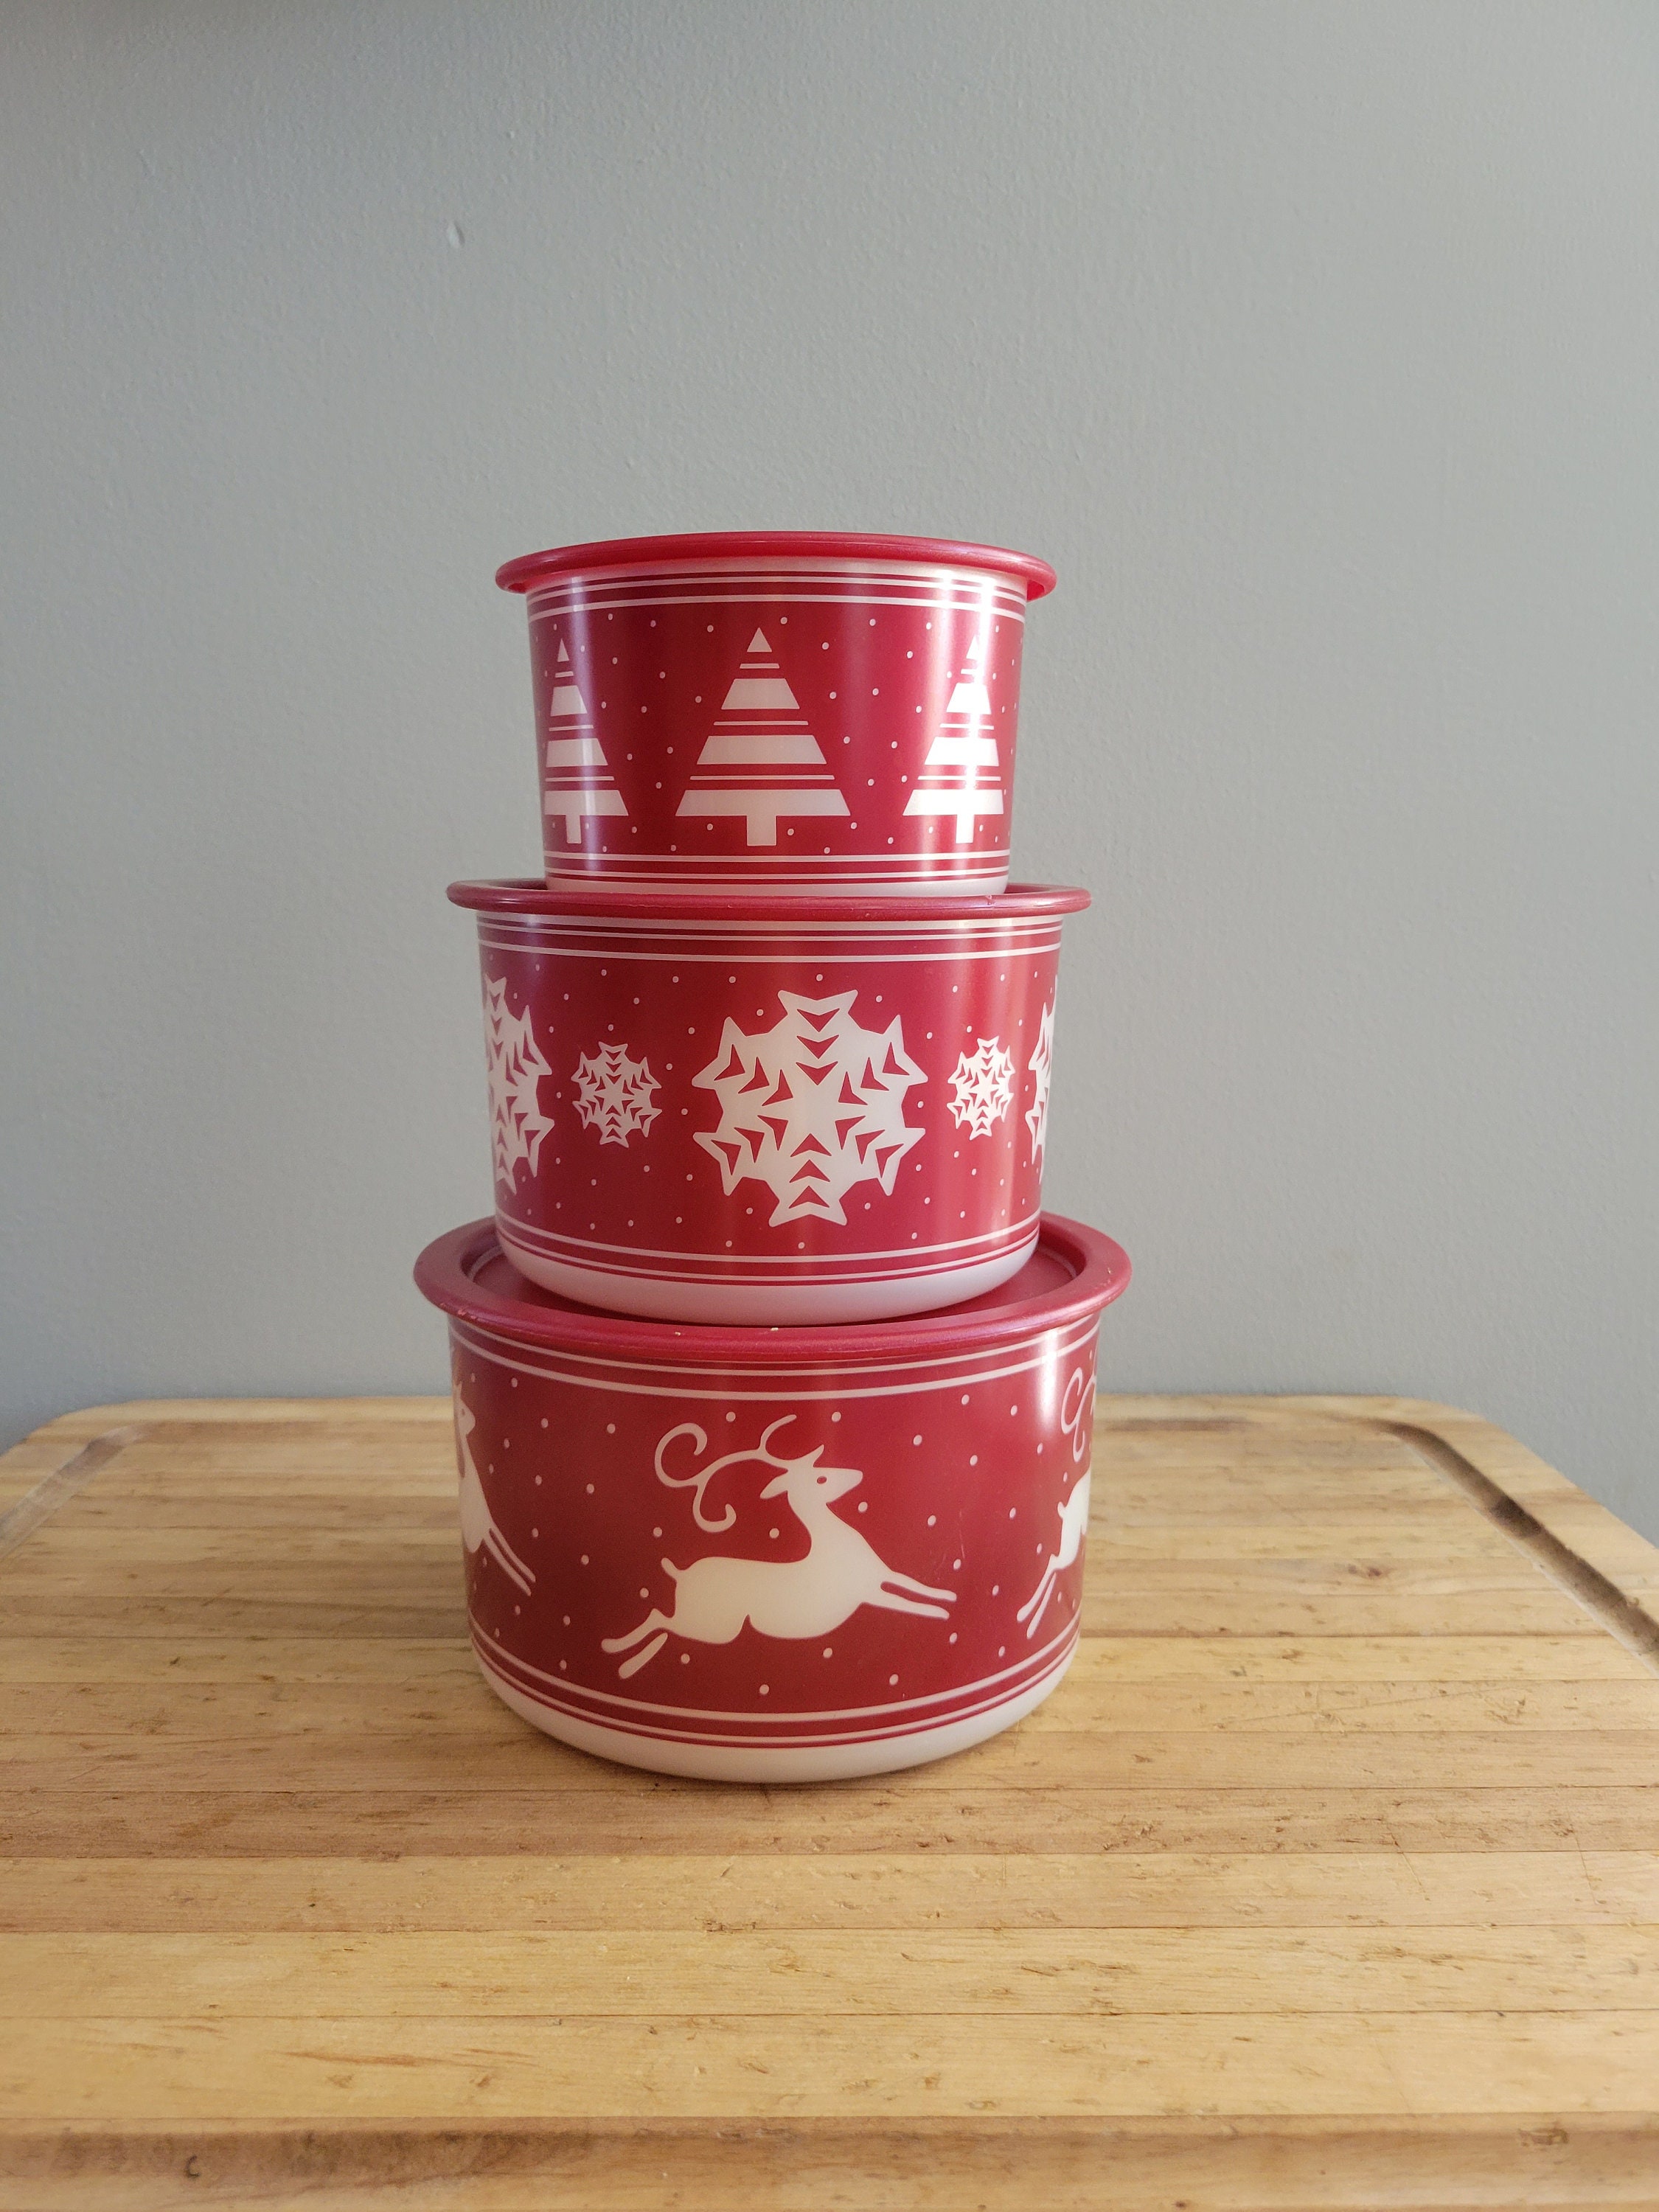 Tupperware Christmas Holiday Stacking Cookie Canisters Containers 10 Pcs